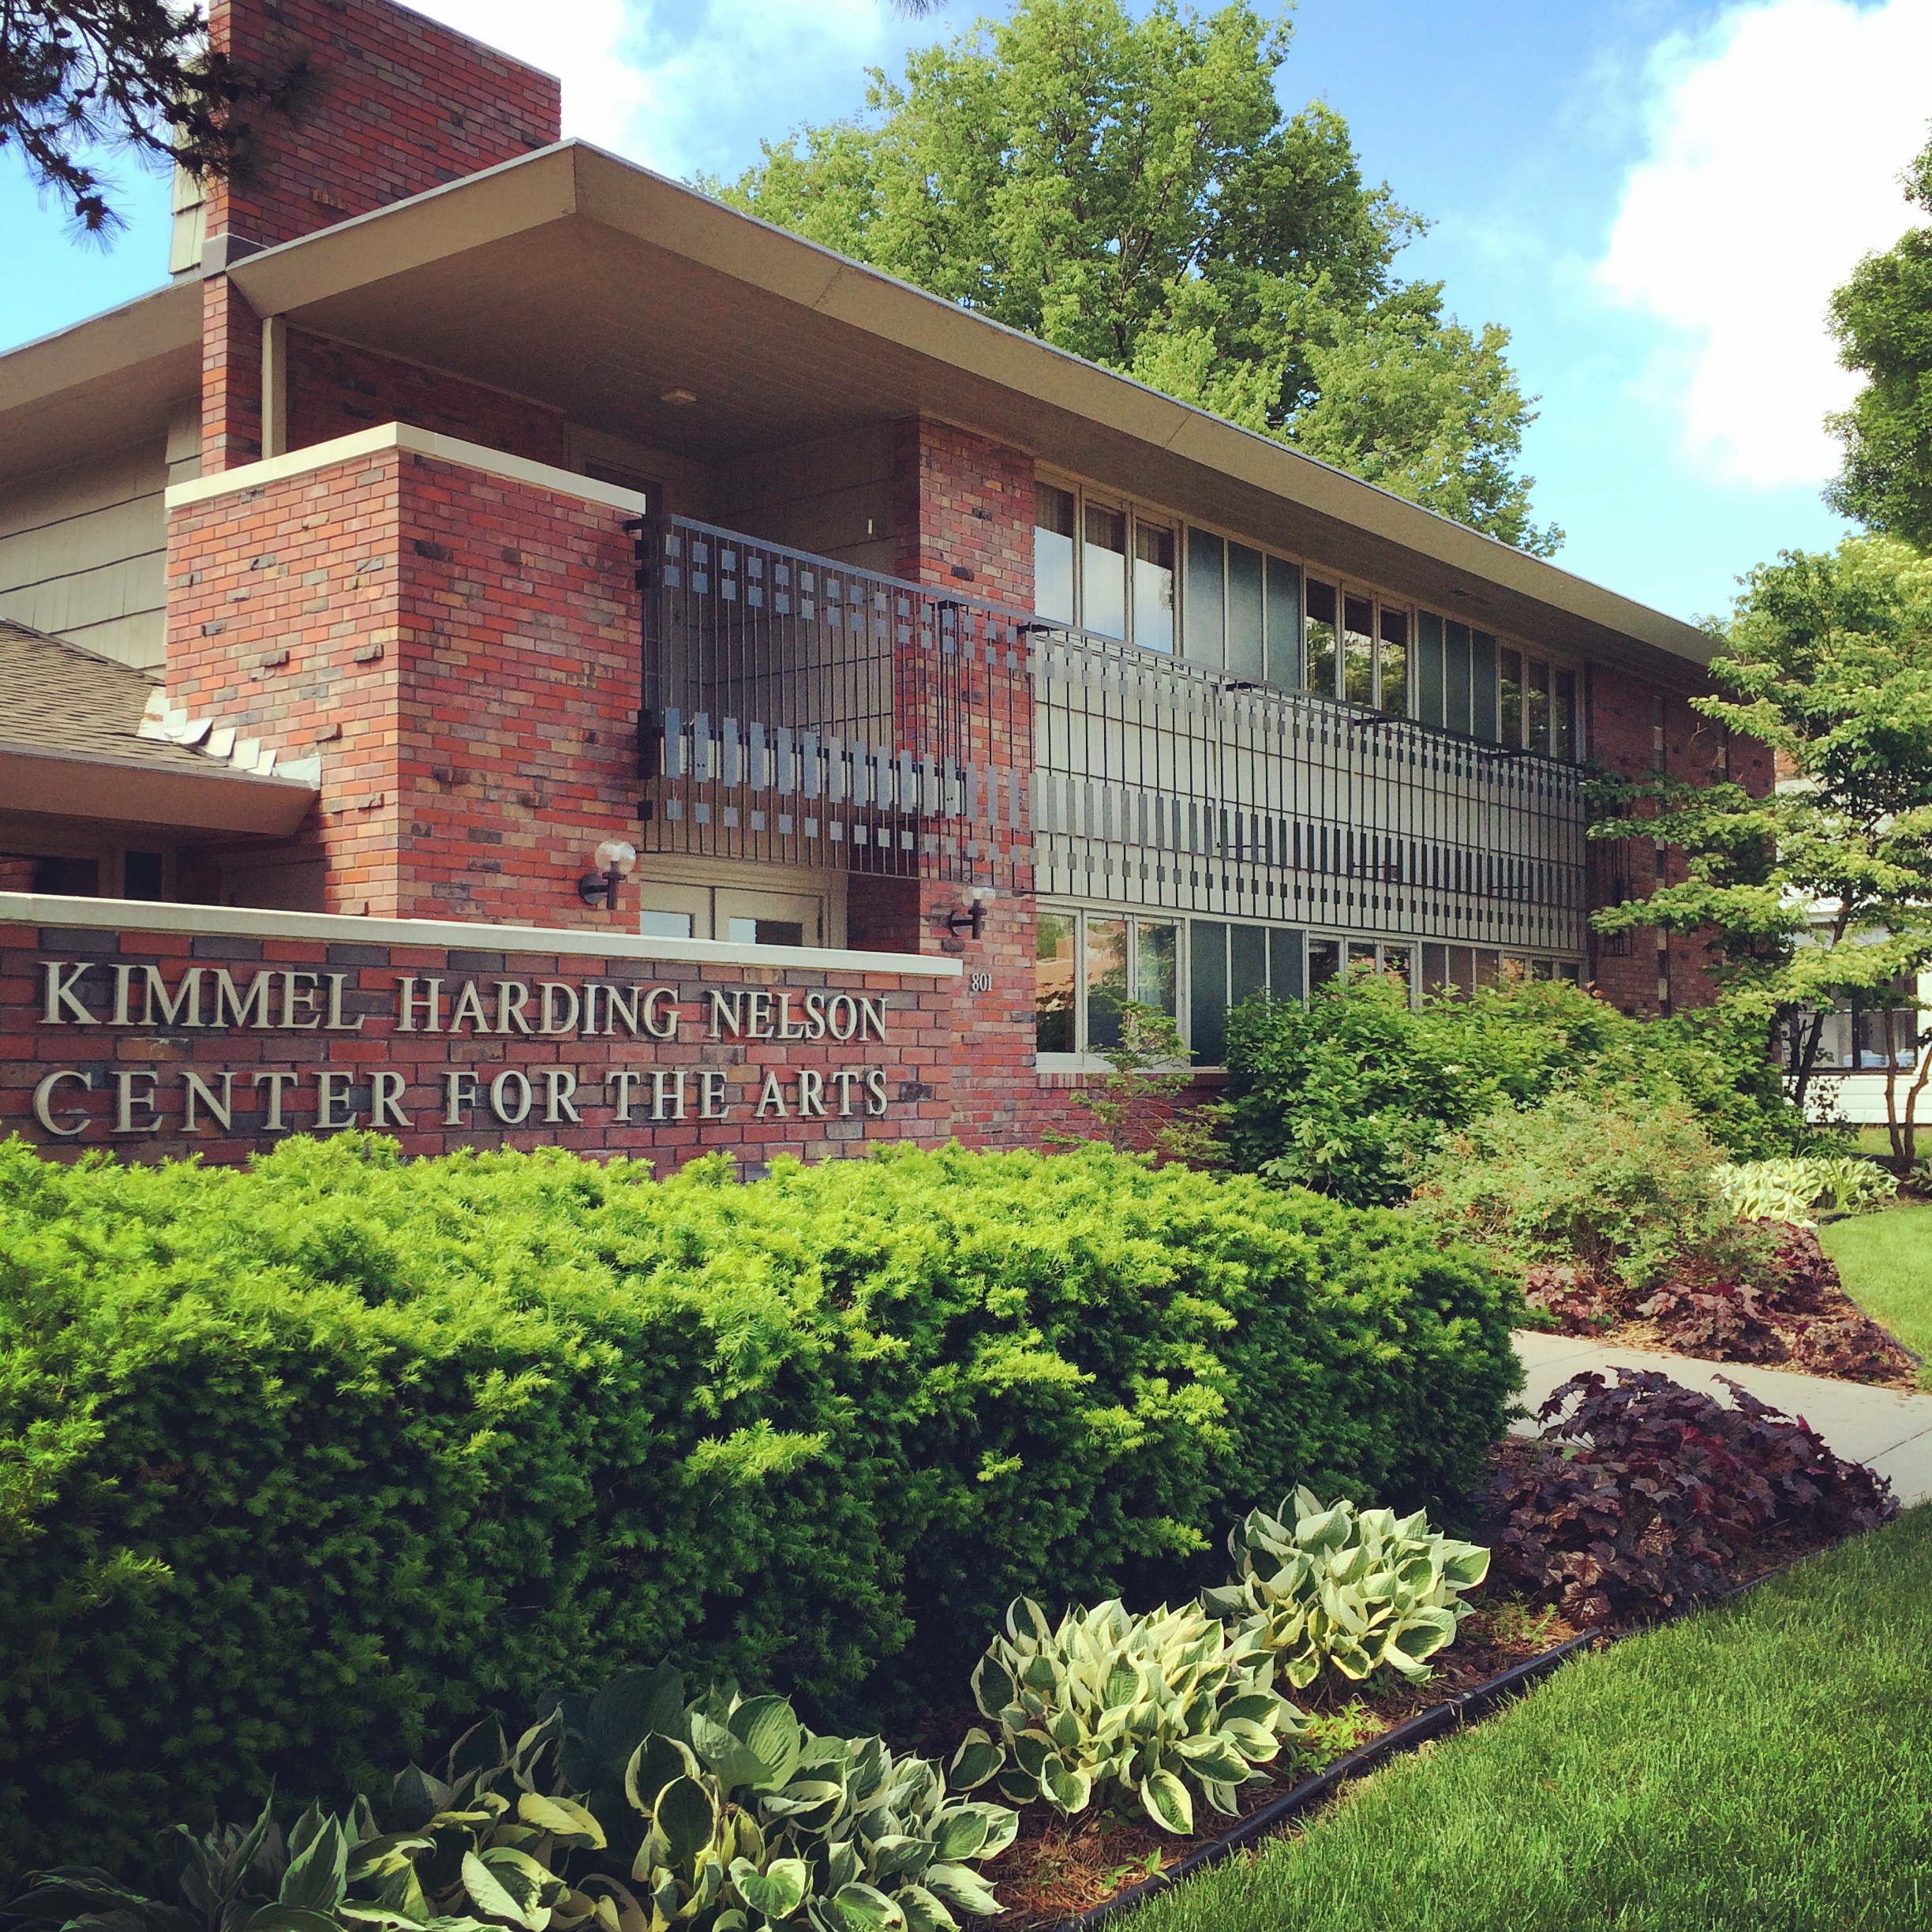 Established in 2001, the Kimmel Harding Nelson Center for the Arts (KHN) is a renowned Artist Residency program that supports established and emerging visual artists, writers, composers, and interdisciplinary artists worldwide. Uniquely housed in a residential prairie-style complex in Nebraska City, Nebraska, KHN awards up to 70 residency awards per year and hosts 5 residents at any time. Residency awards are 2-8 weeks in length and include a weekly $175 stipend. In addition, residents receive their own private bedroom, bathroom, and studio. To apply, please see details and instructions at khncenterforthearts.org/residency. Two annual application deadlines: March 1 and September 1. The Kimmel Harding Nelson Center for the Arts is a program of the Richard P. Kimmel and Laurine Kimmel Charitable Foundation.